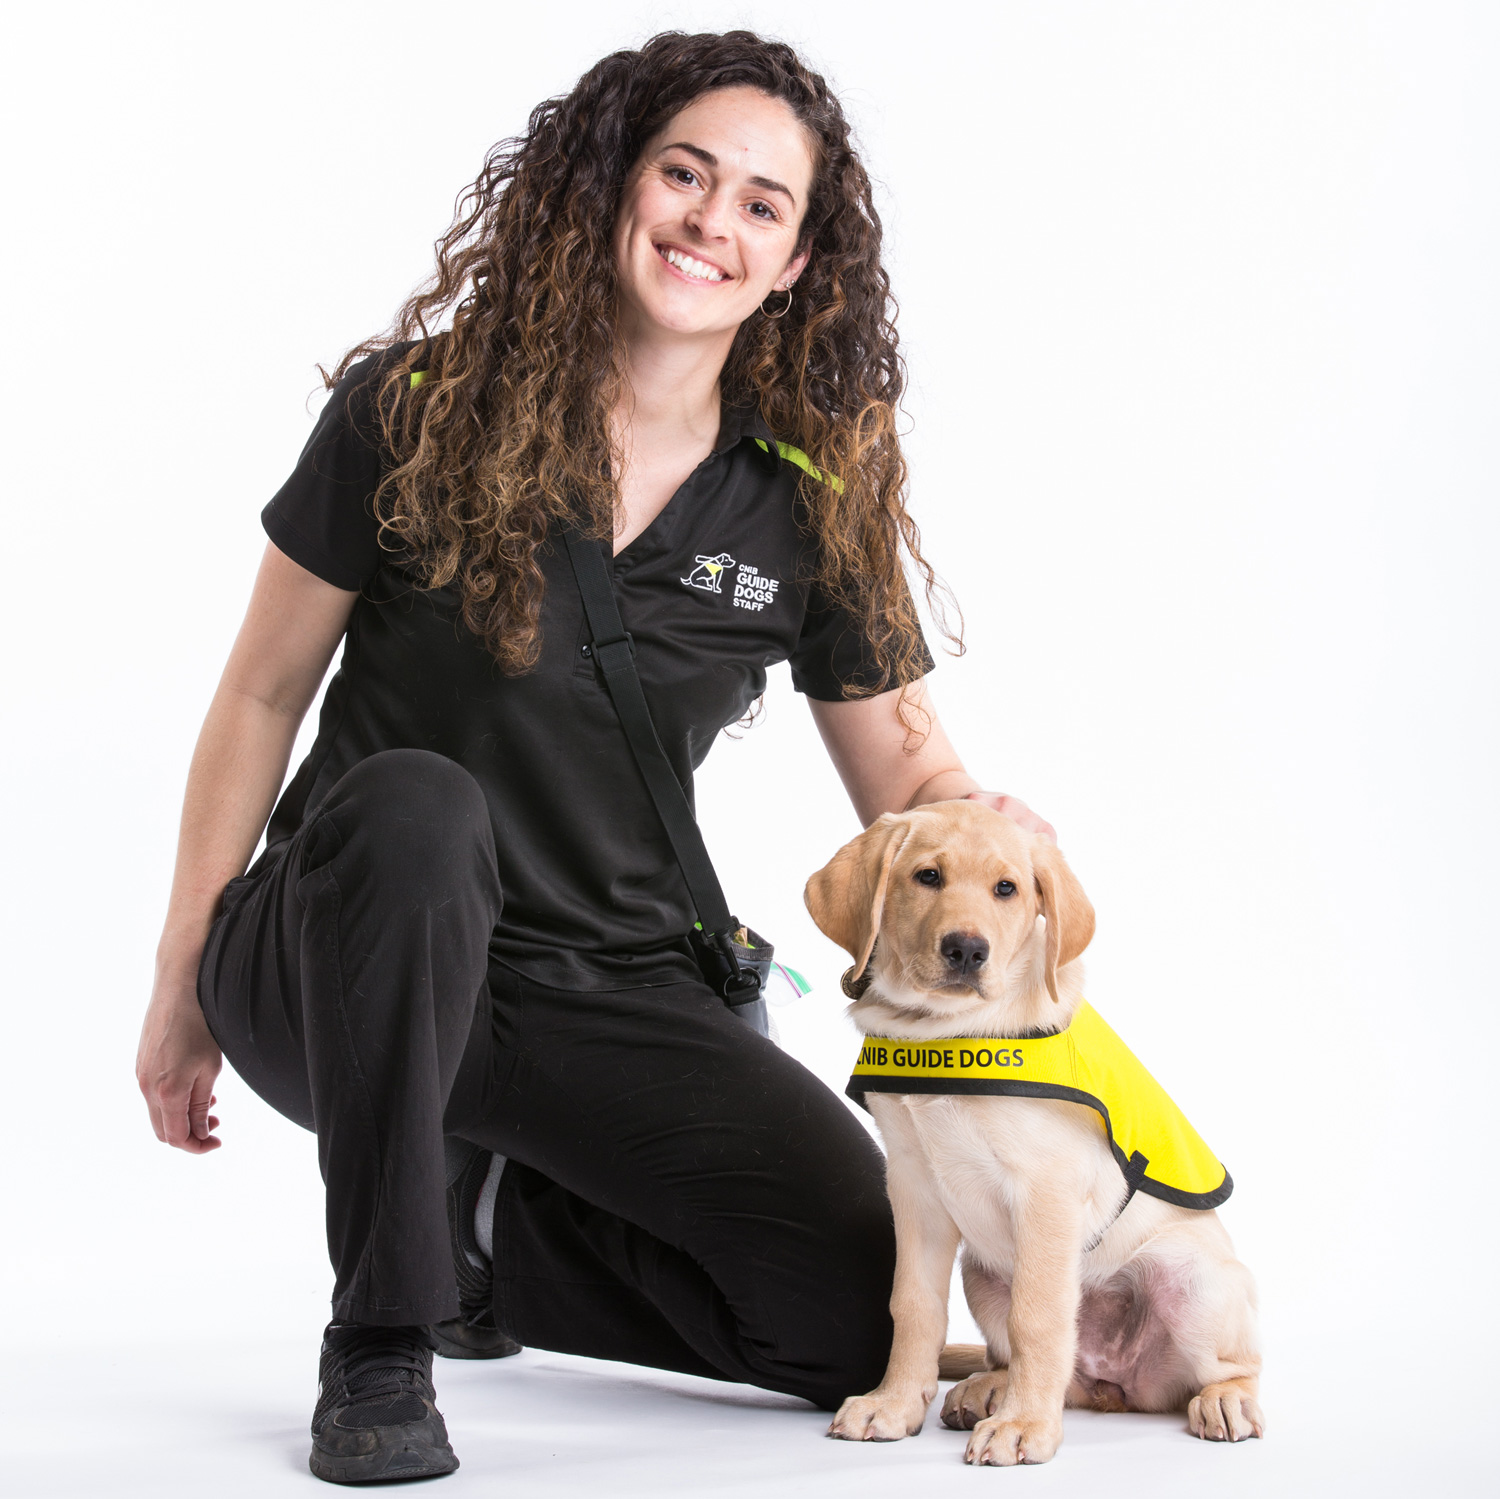 CNIB Guide Dogs trainer with puppy in training